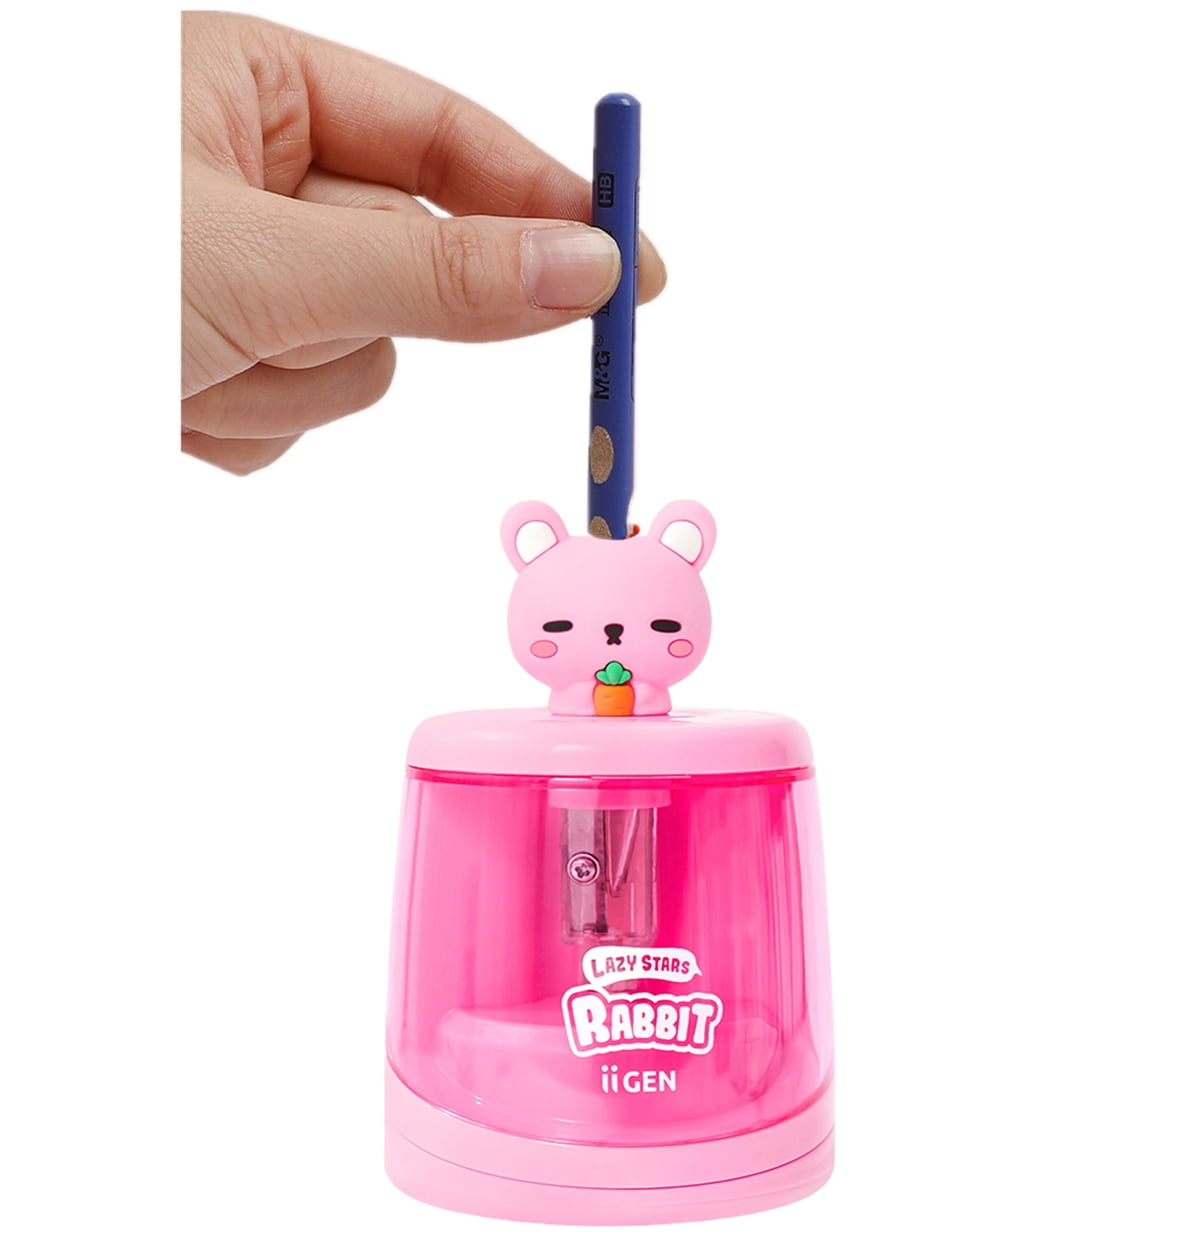 Deli Electric Pencil Sharpener,Suitable for No.2 Pencils Colored Pencils, USB & Battery Operated, Pink